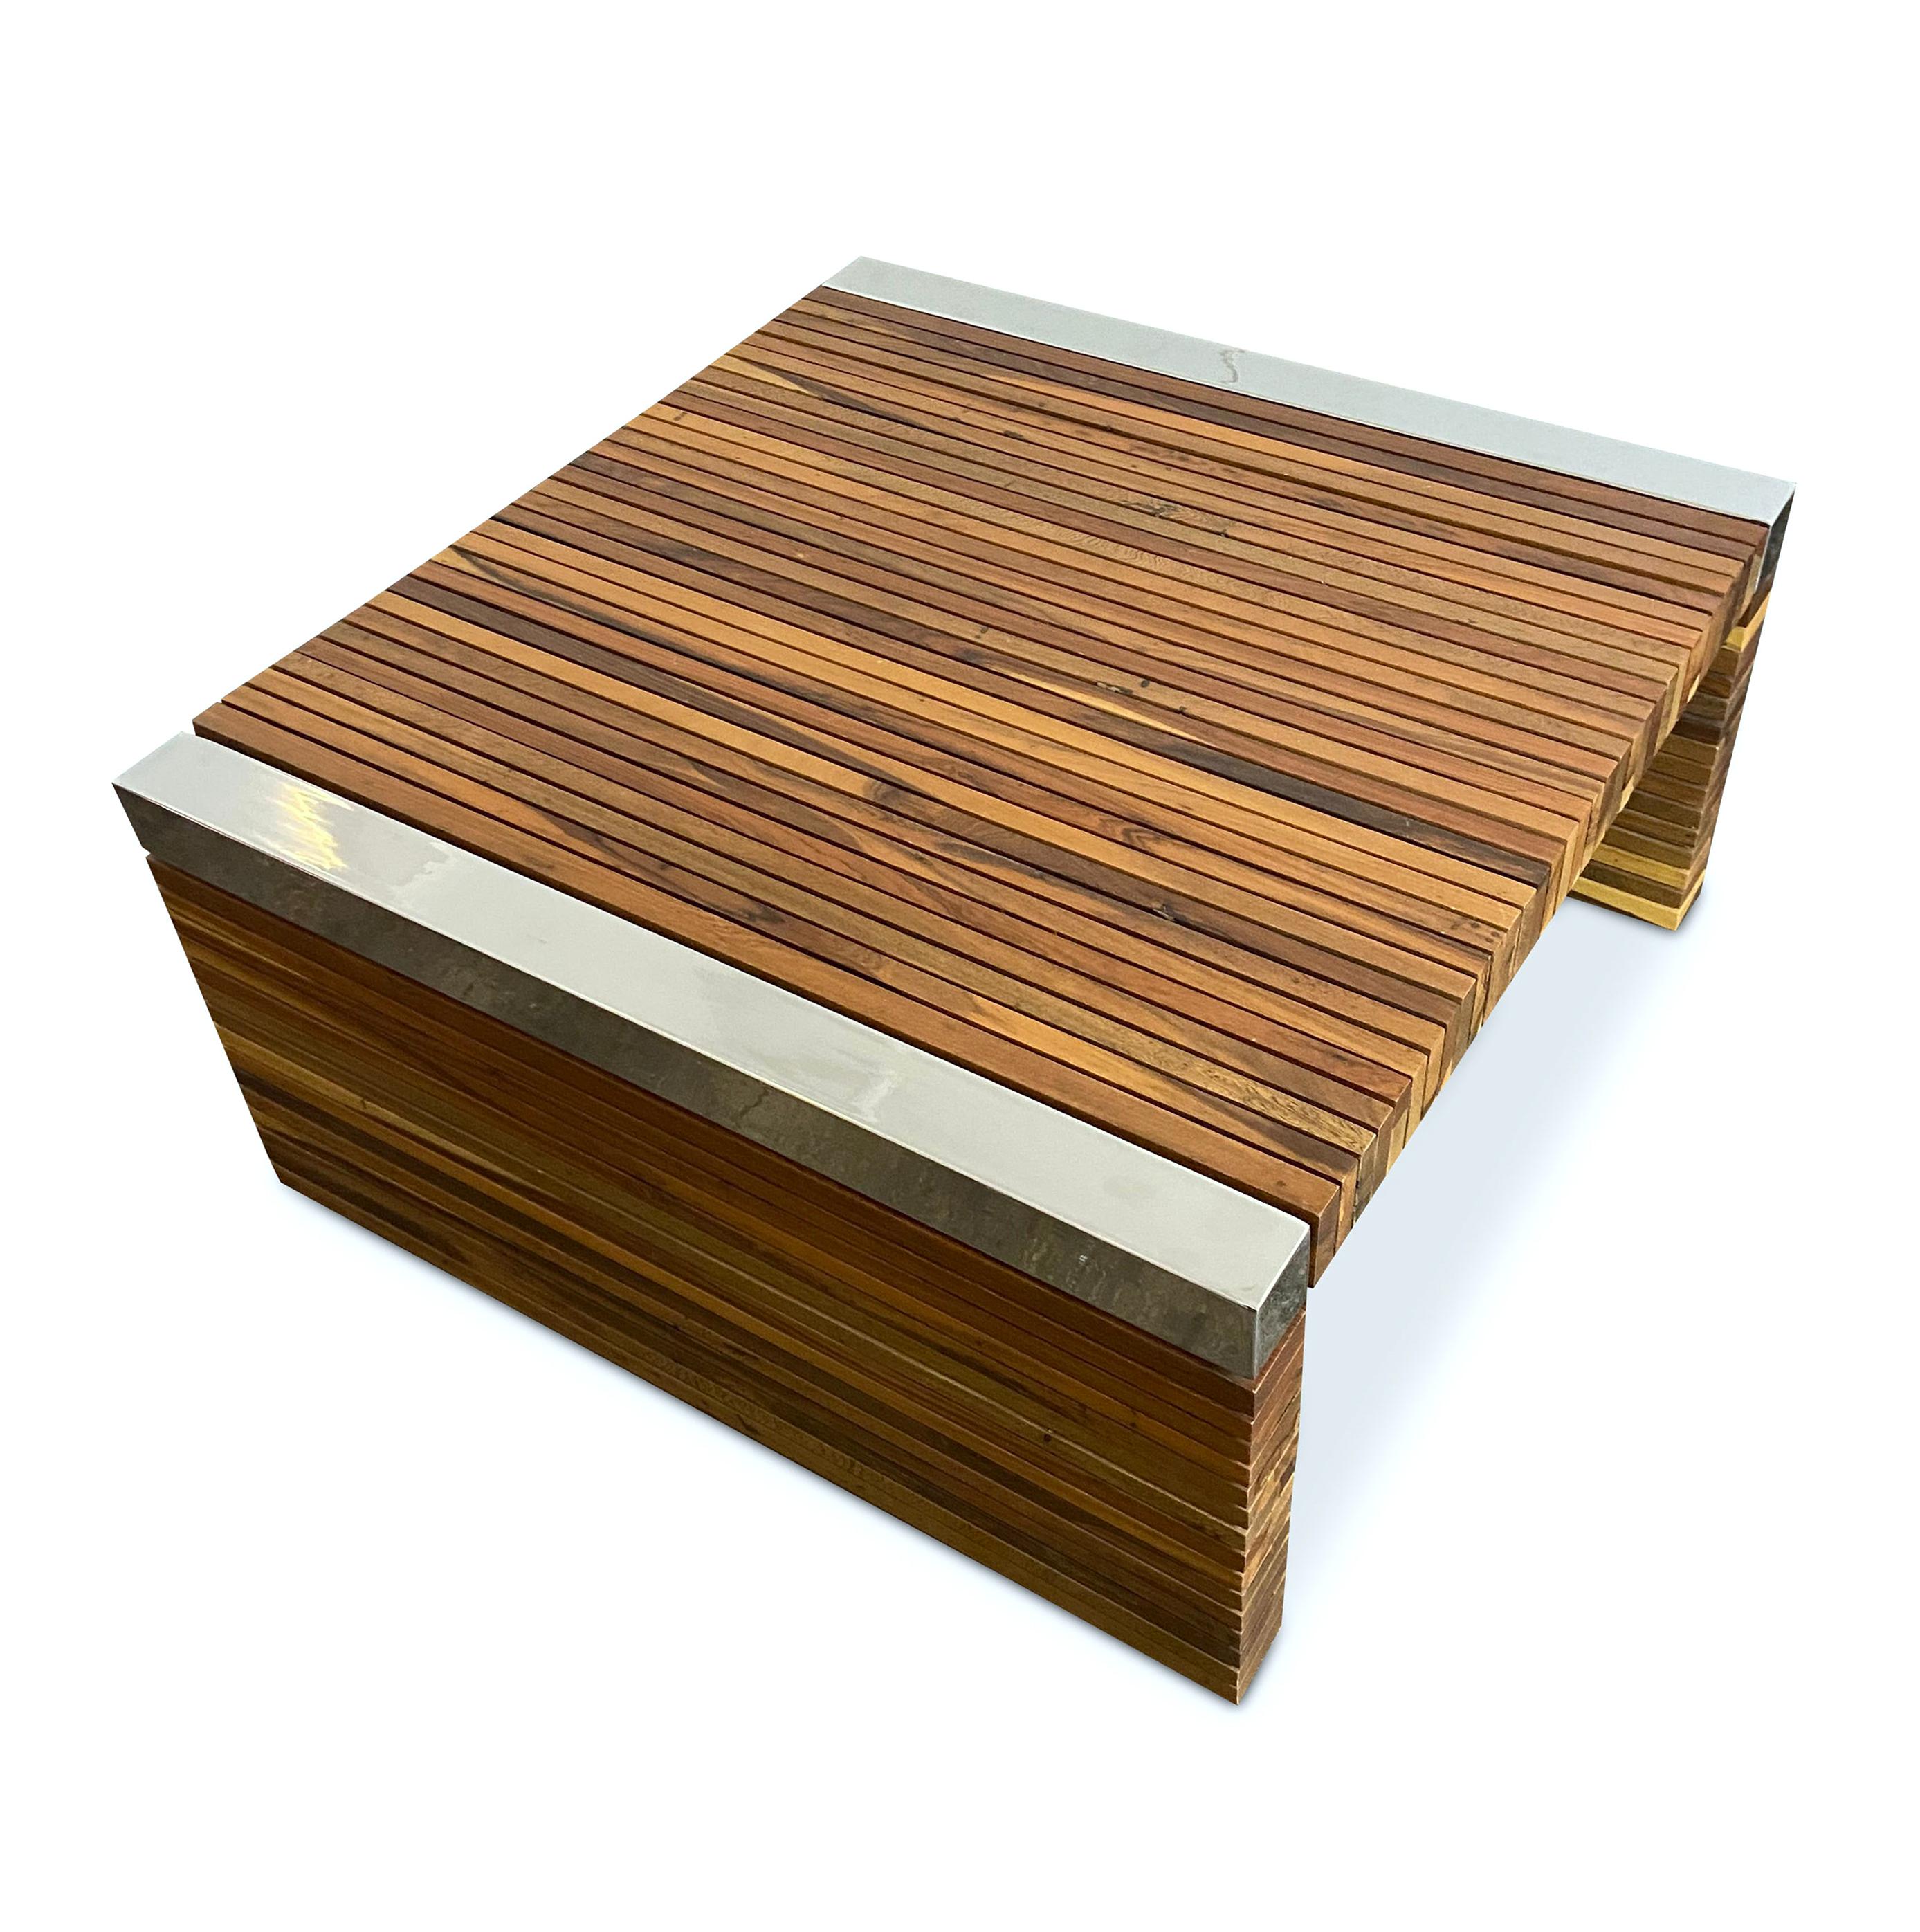 Argentine Coffee Table with Exotic Wood Slats and Nickel-Plated Details, Argilla For Sale